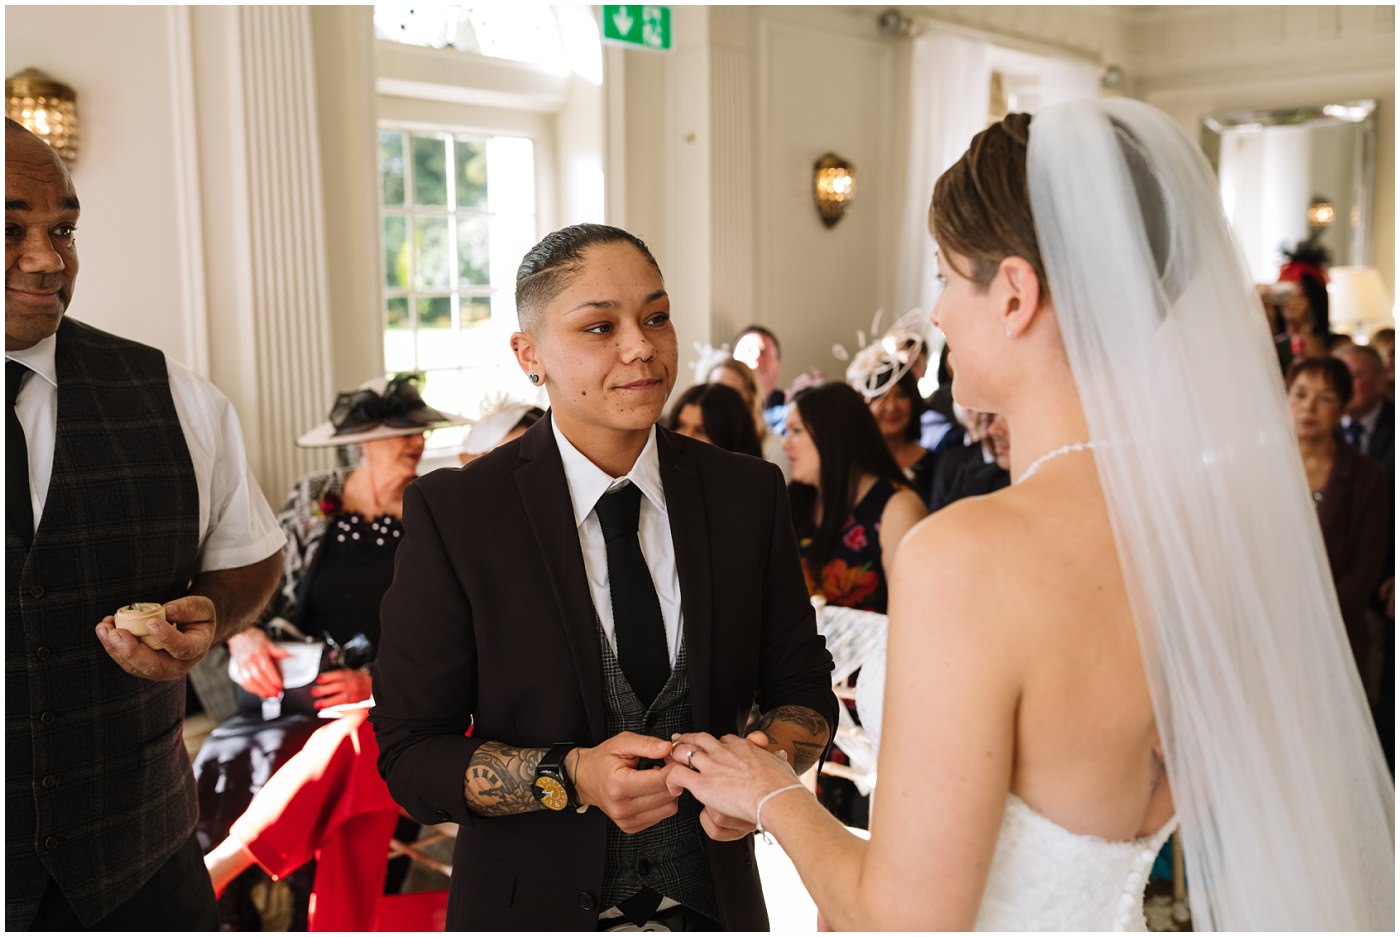 Exchange of wedding rings at Eaves Hall Wedding Ceremony